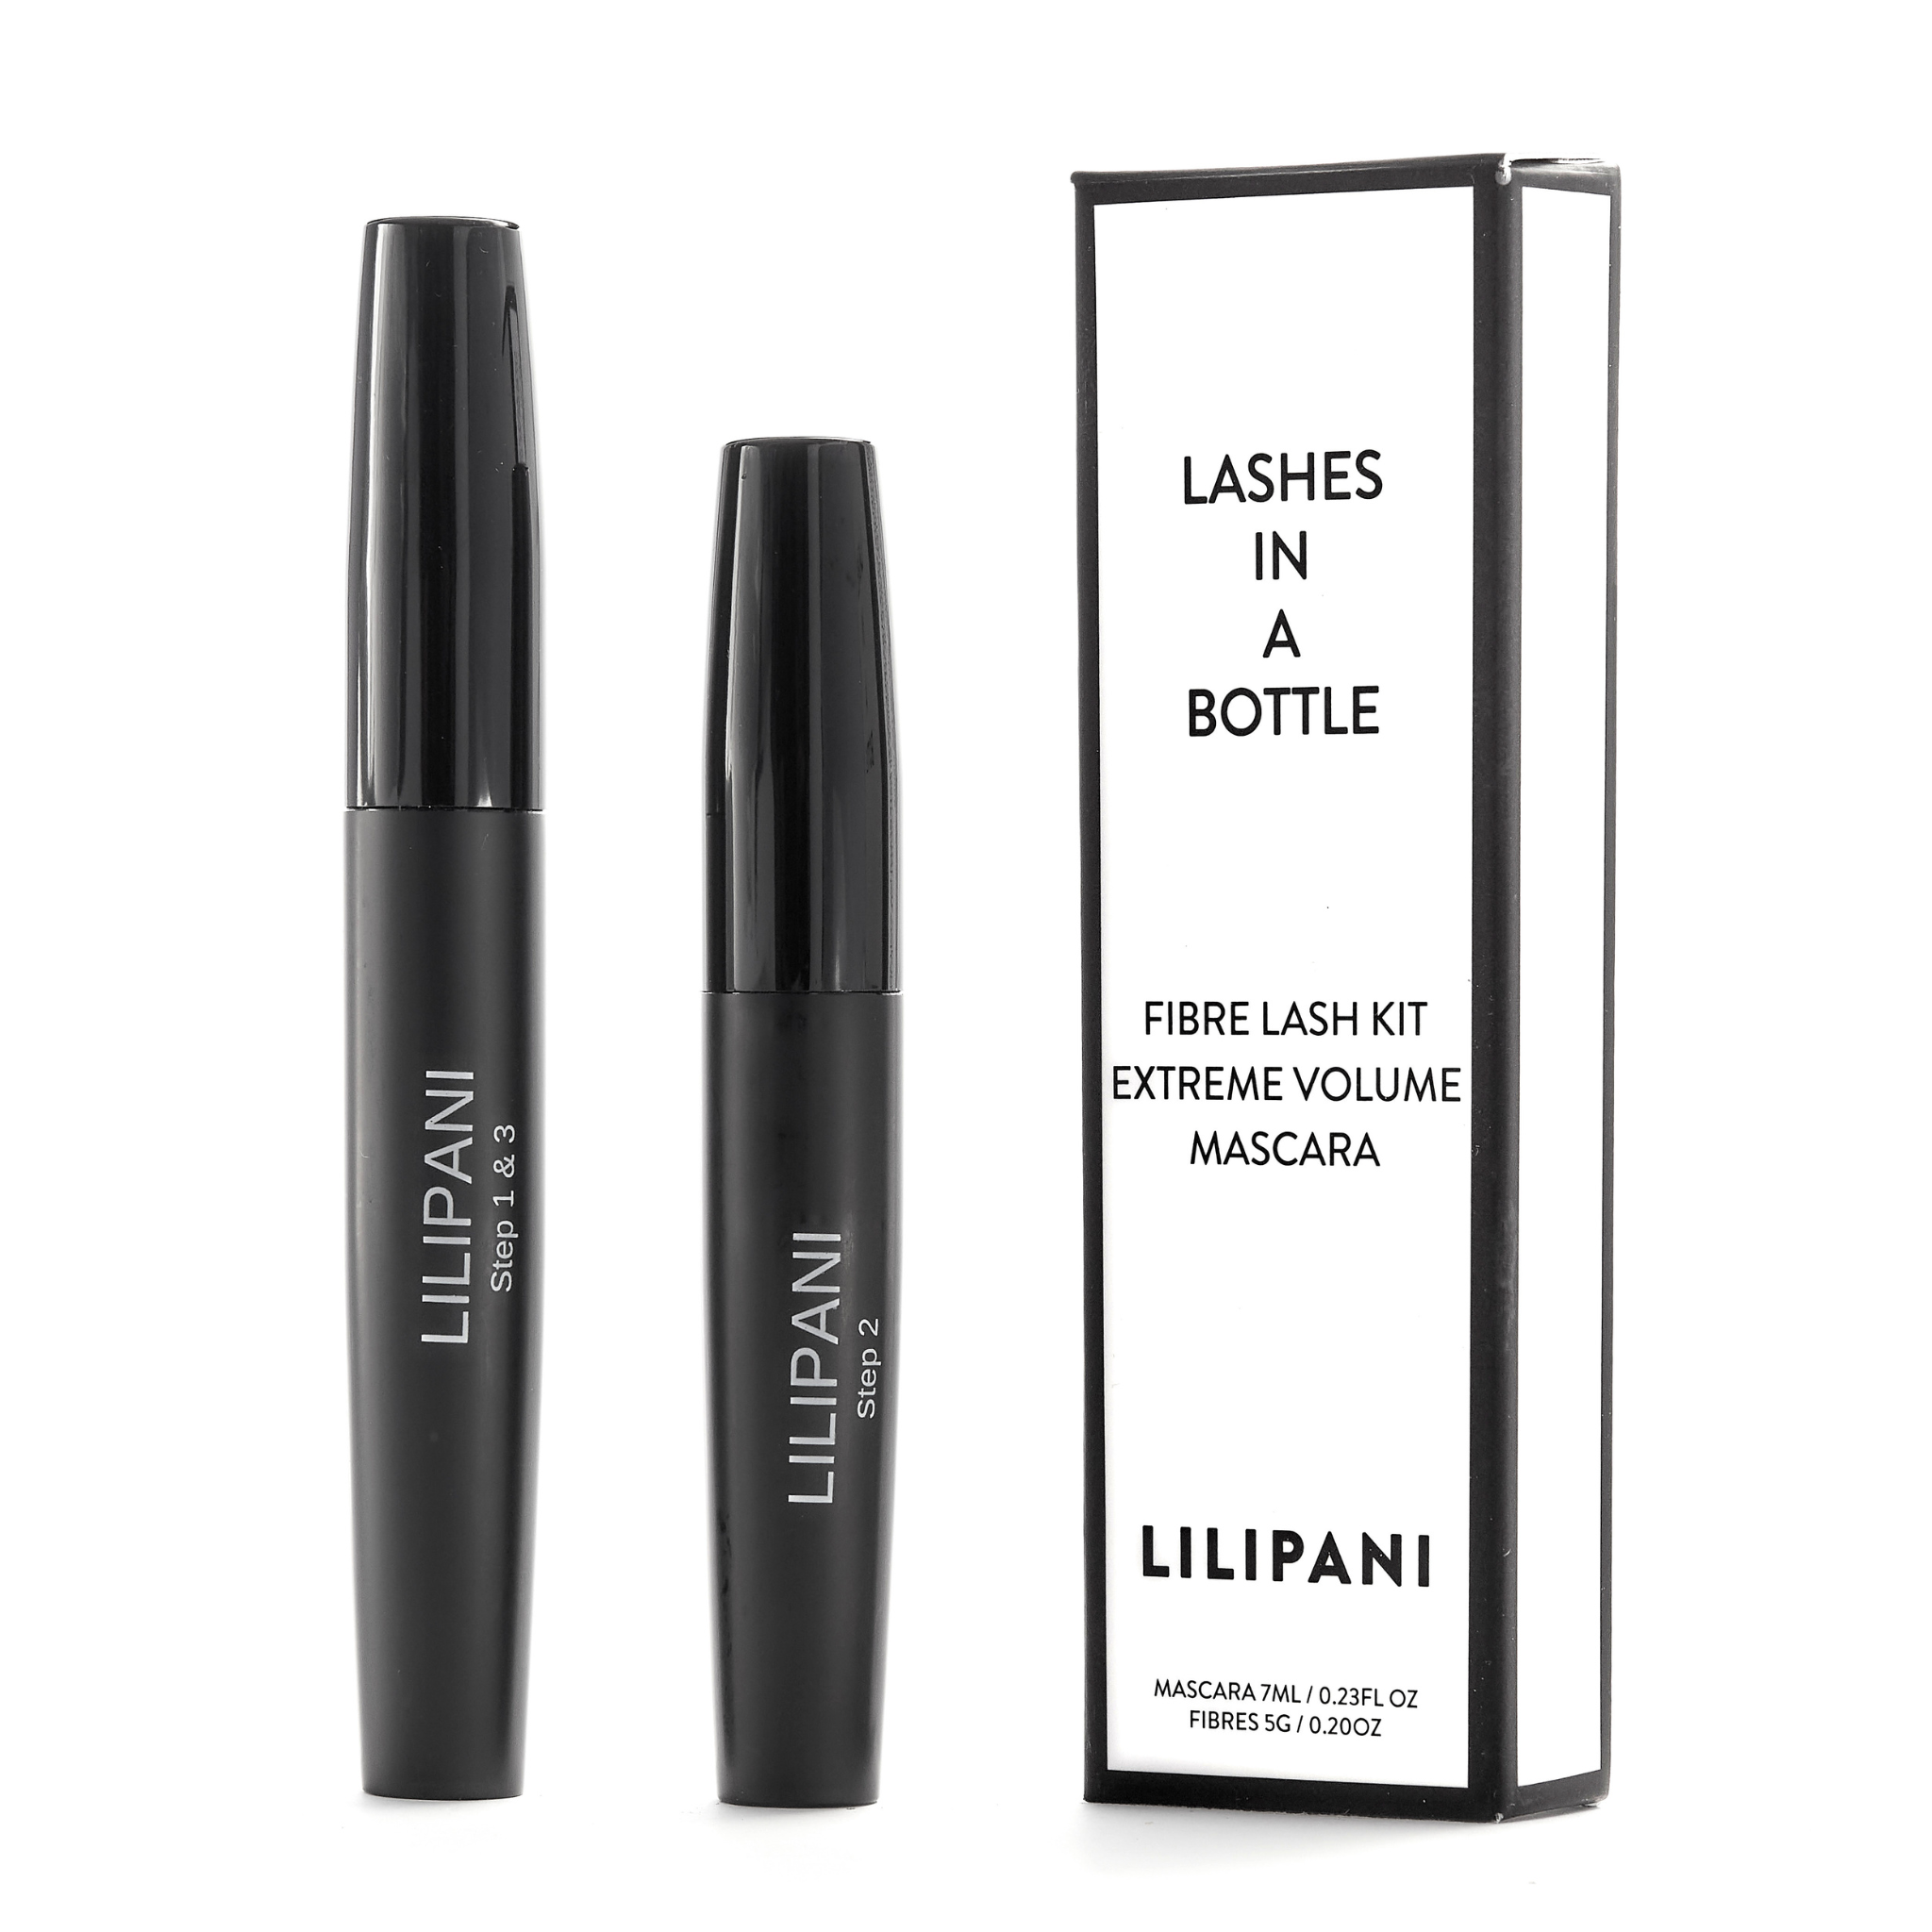 Lashes in a Bottle